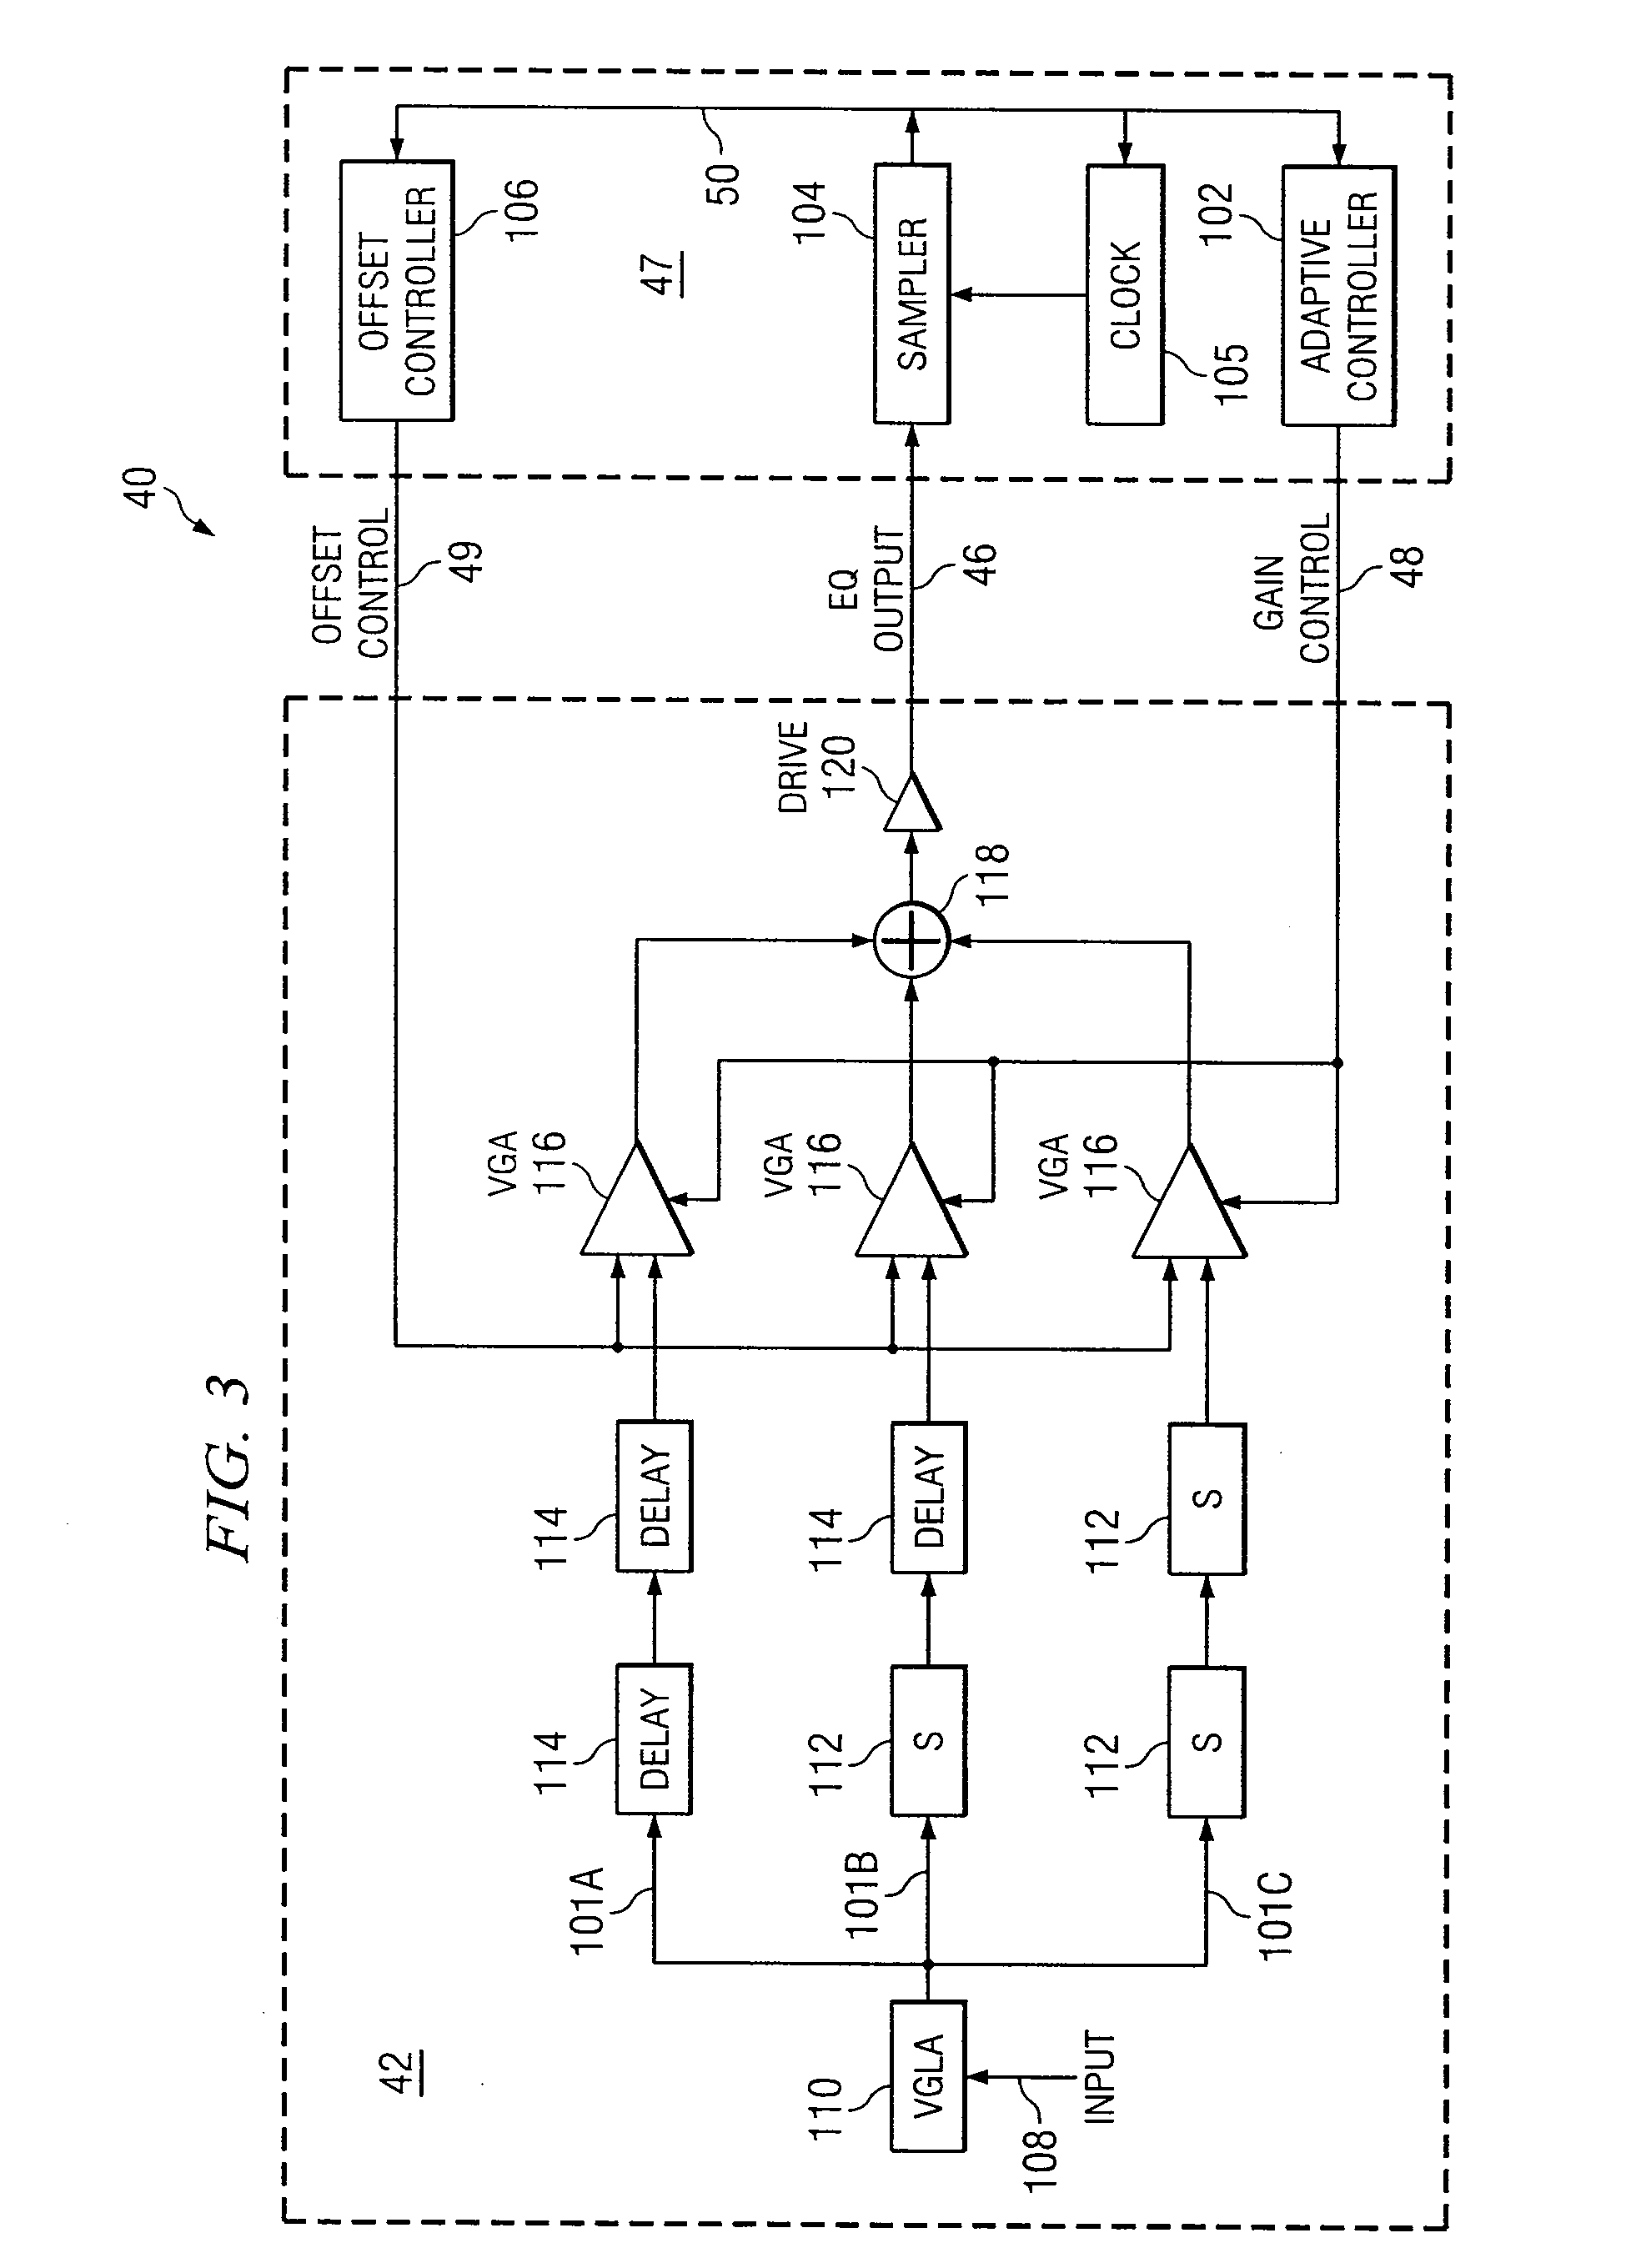 System and Method for Asymmetrically Adjusting Compensation Applied to a Signal